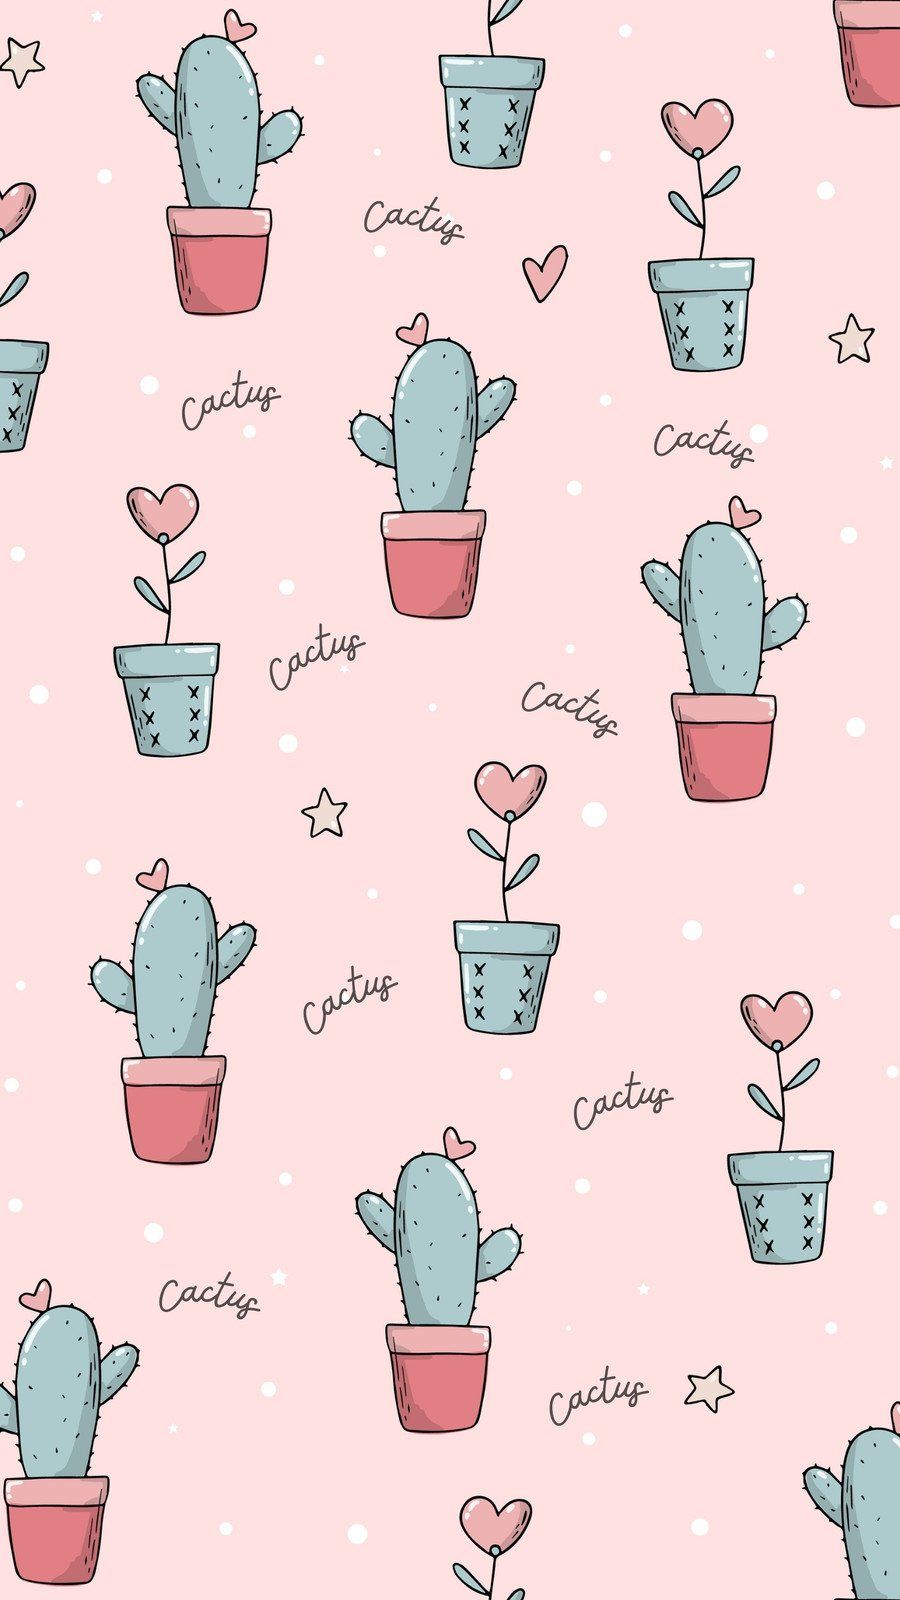 Cactus wallpaper for your phone! - Cactus